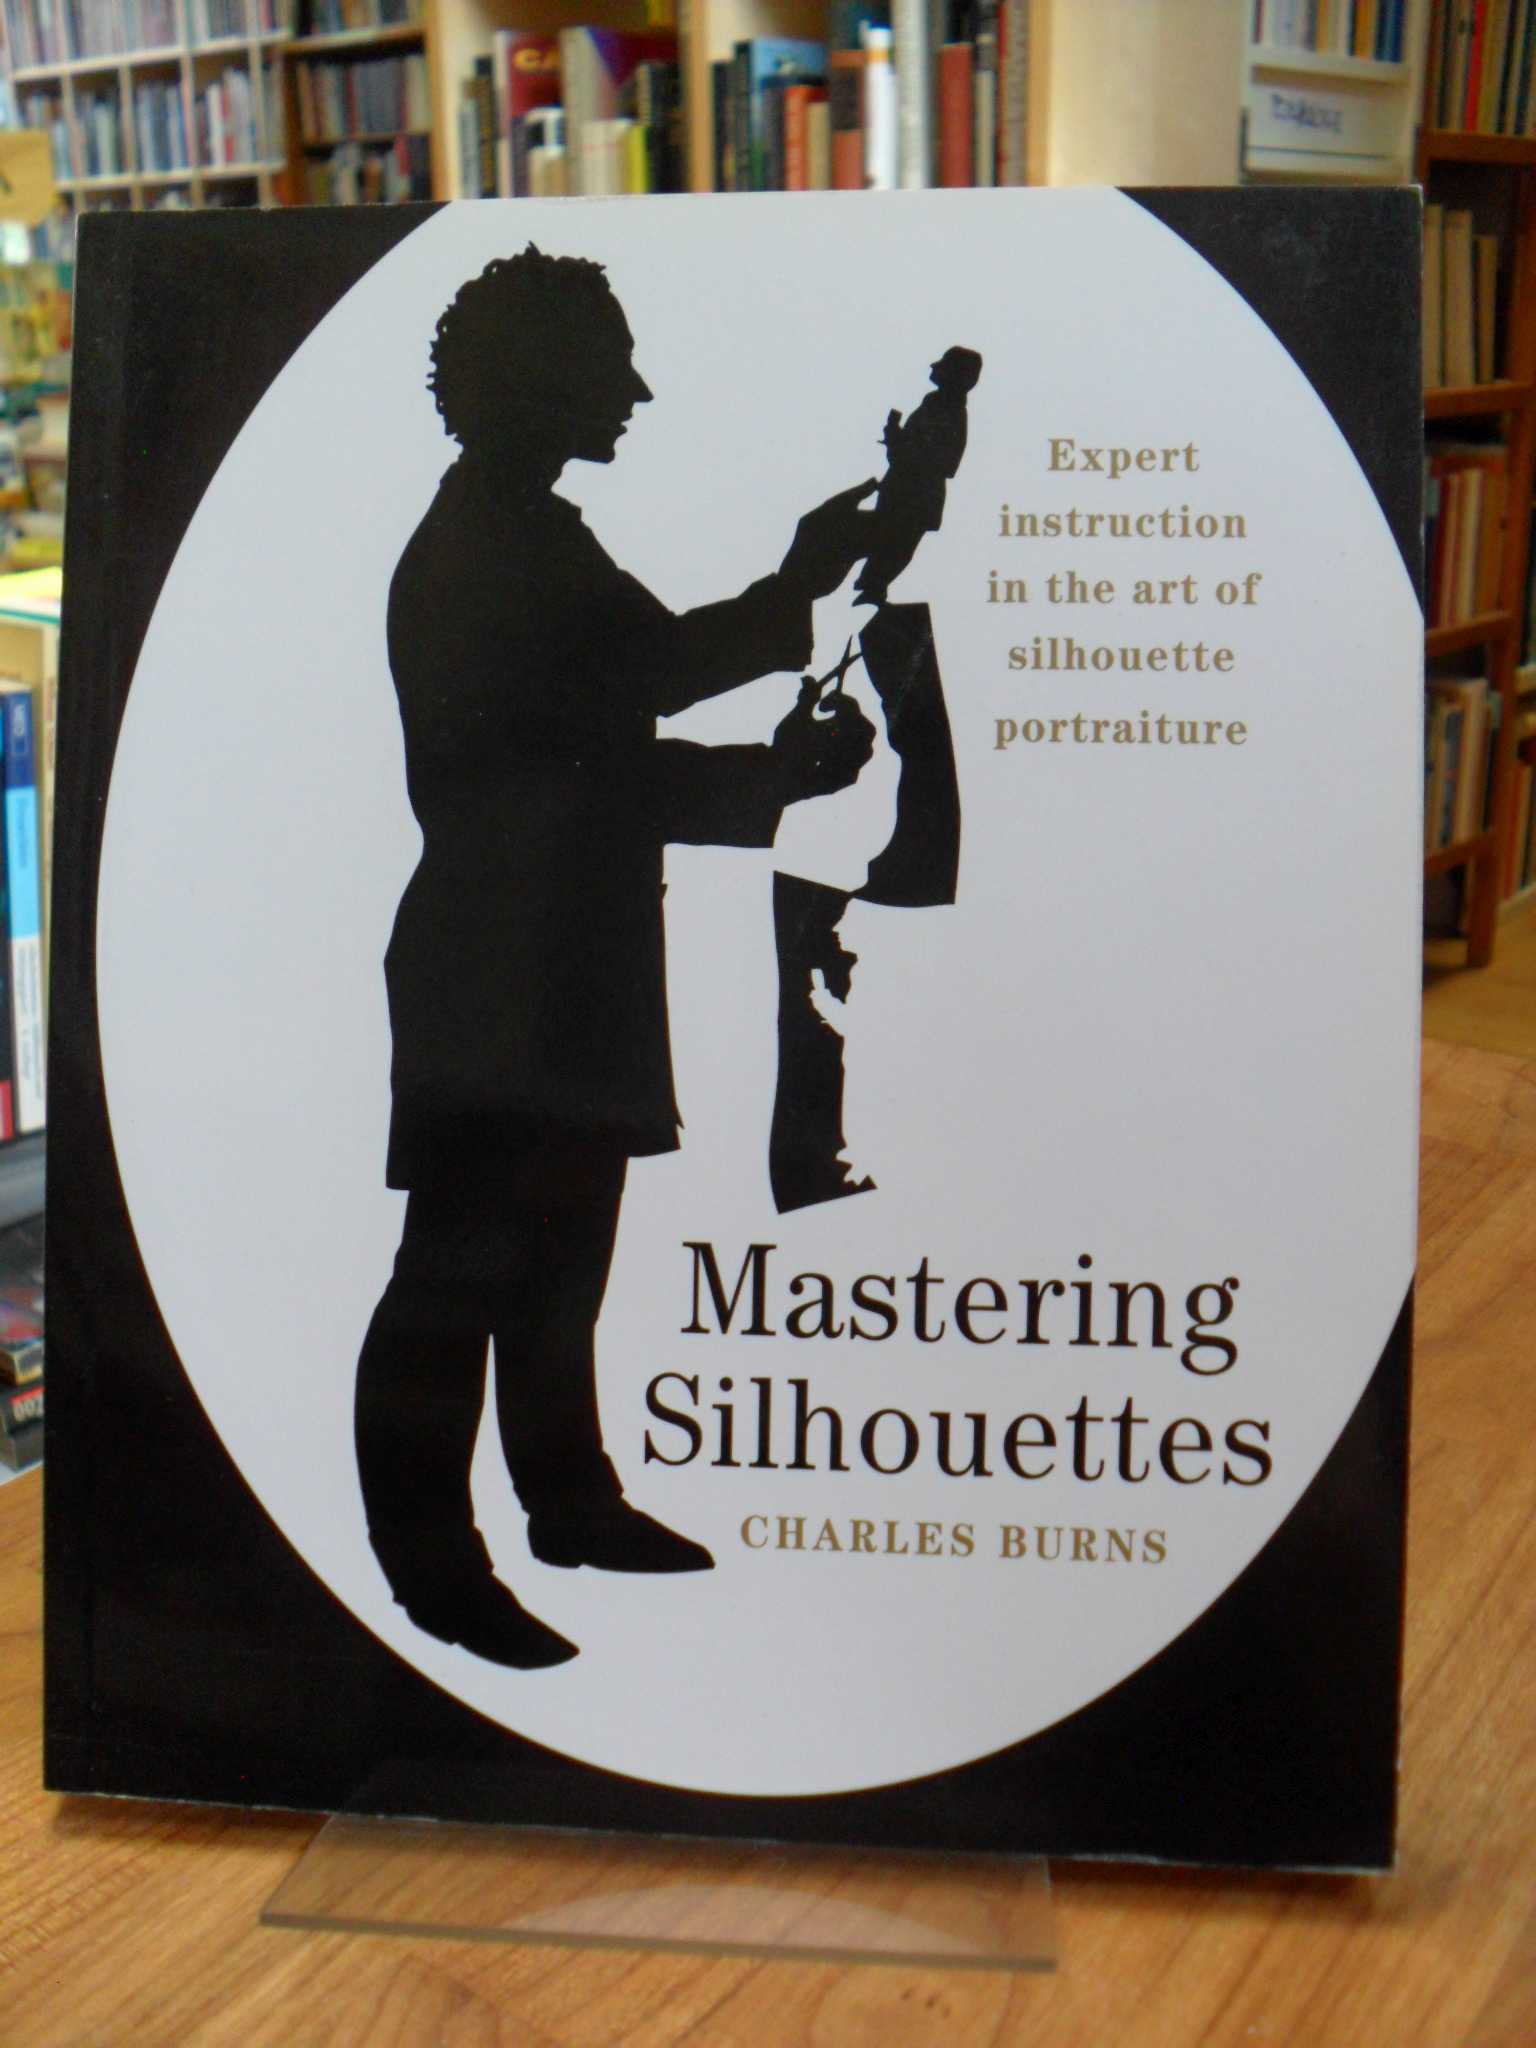 Burns, Mastering Silhouettes,